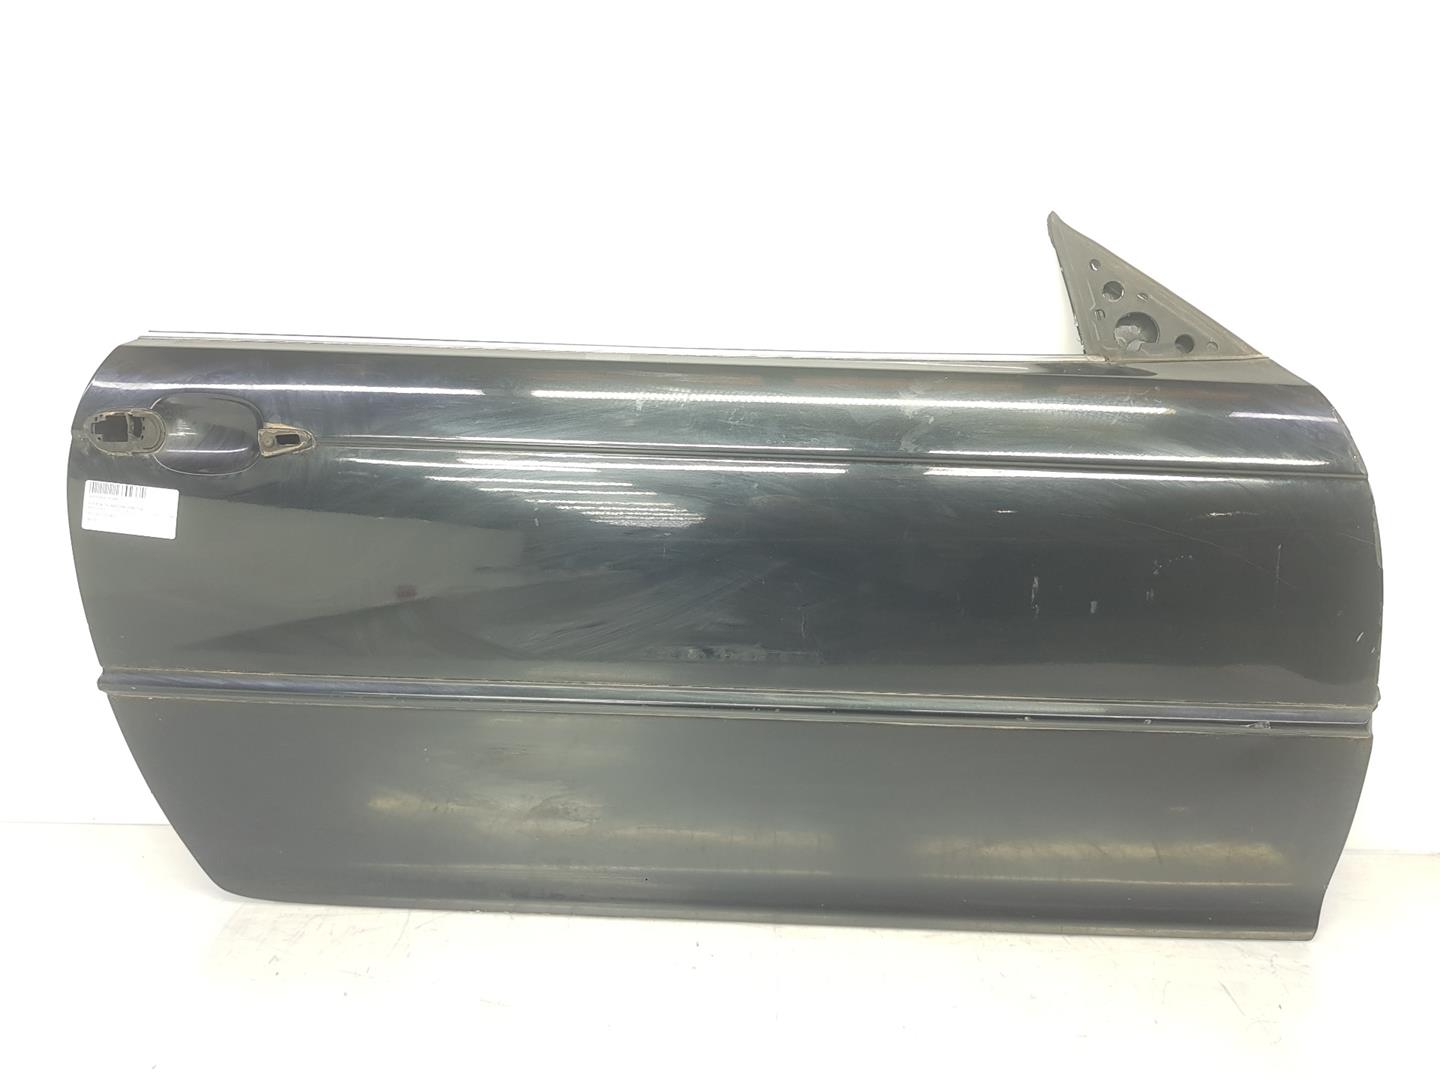 BMW 3 Series E46 (1997-2006) Front Right Door 41517038092, 41517038092, COLORNEGRO475 19792308